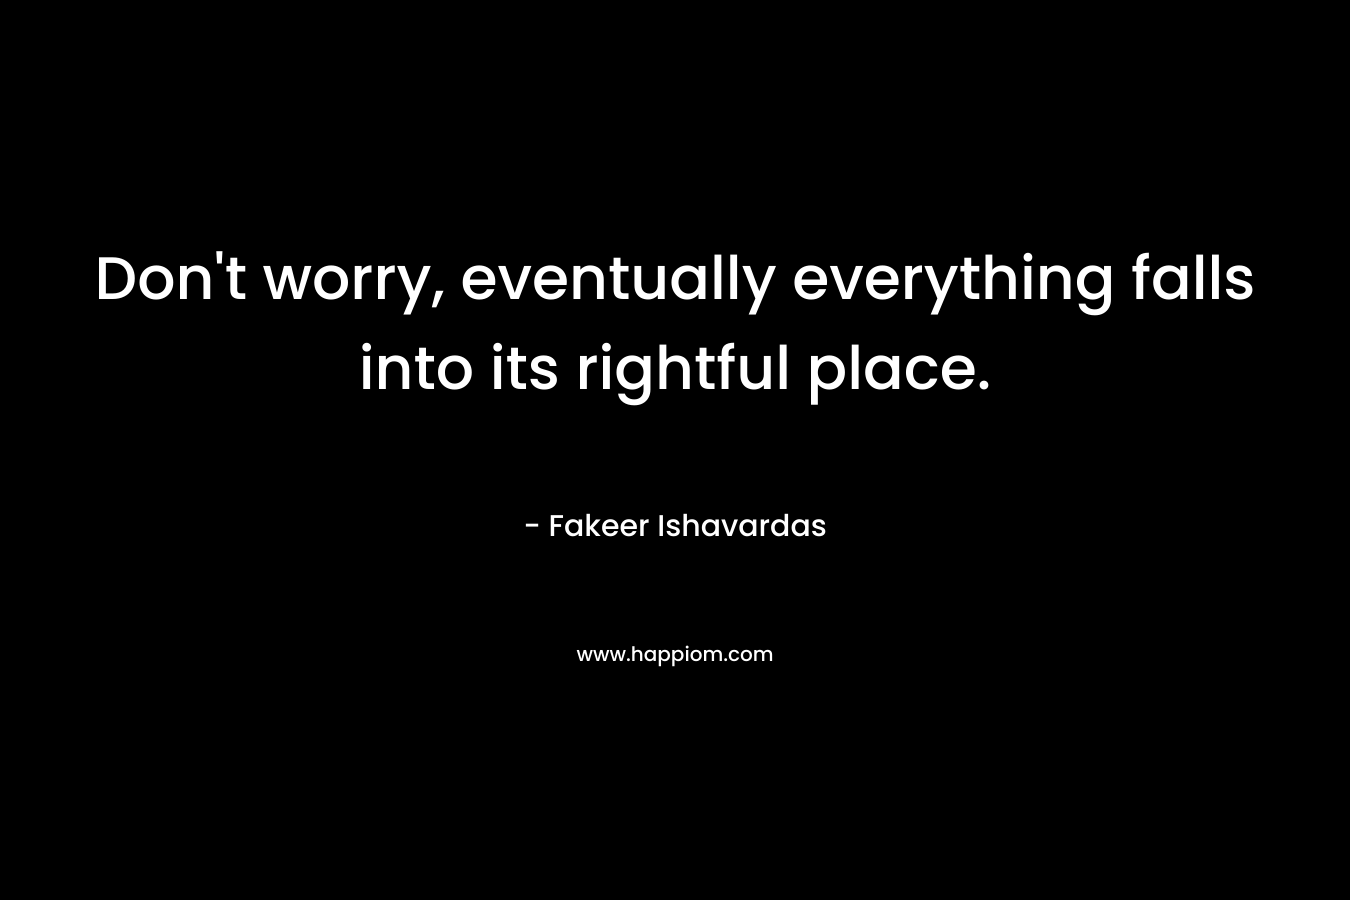 Don't worry, eventually everything falls into its rightful place.